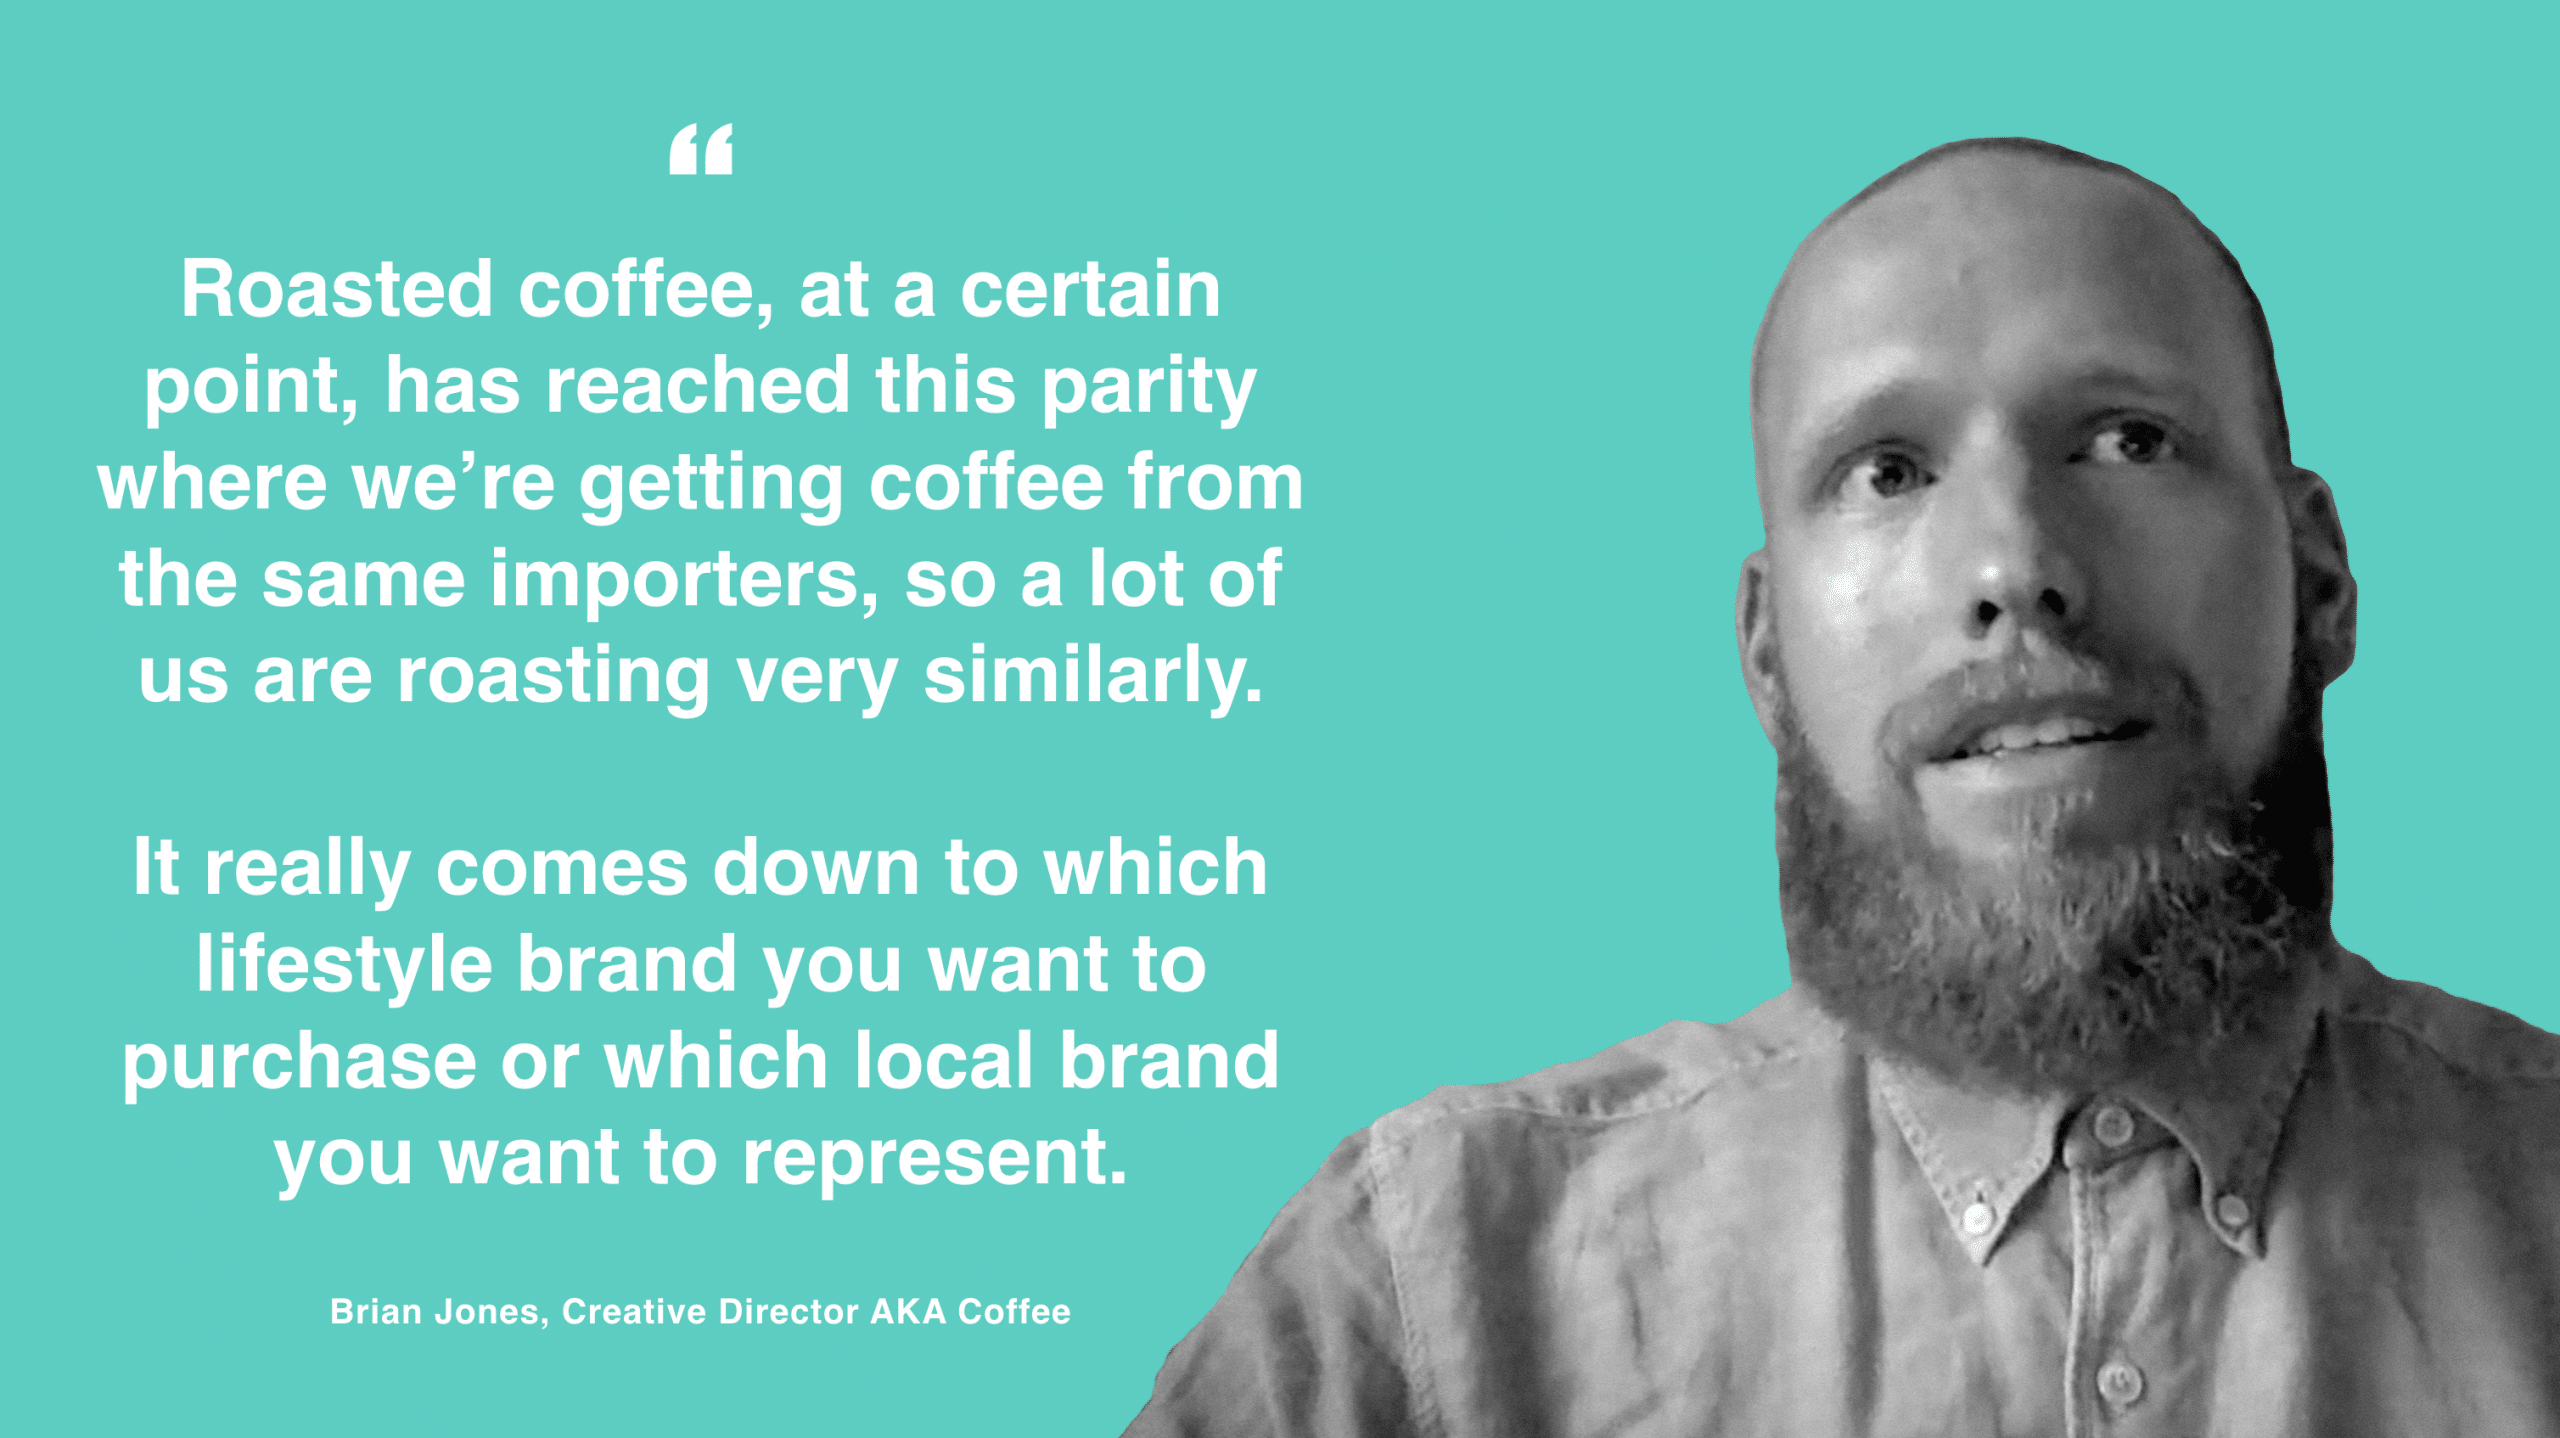 "Roasted coffee, at a certain point, has reached this parity where we’re getting coffee from the same importers, so a lot of us are roasting very similarly. It really comes down to which lifestyle brand you want to purchase or which local brand you want to represent." - Brian Jones